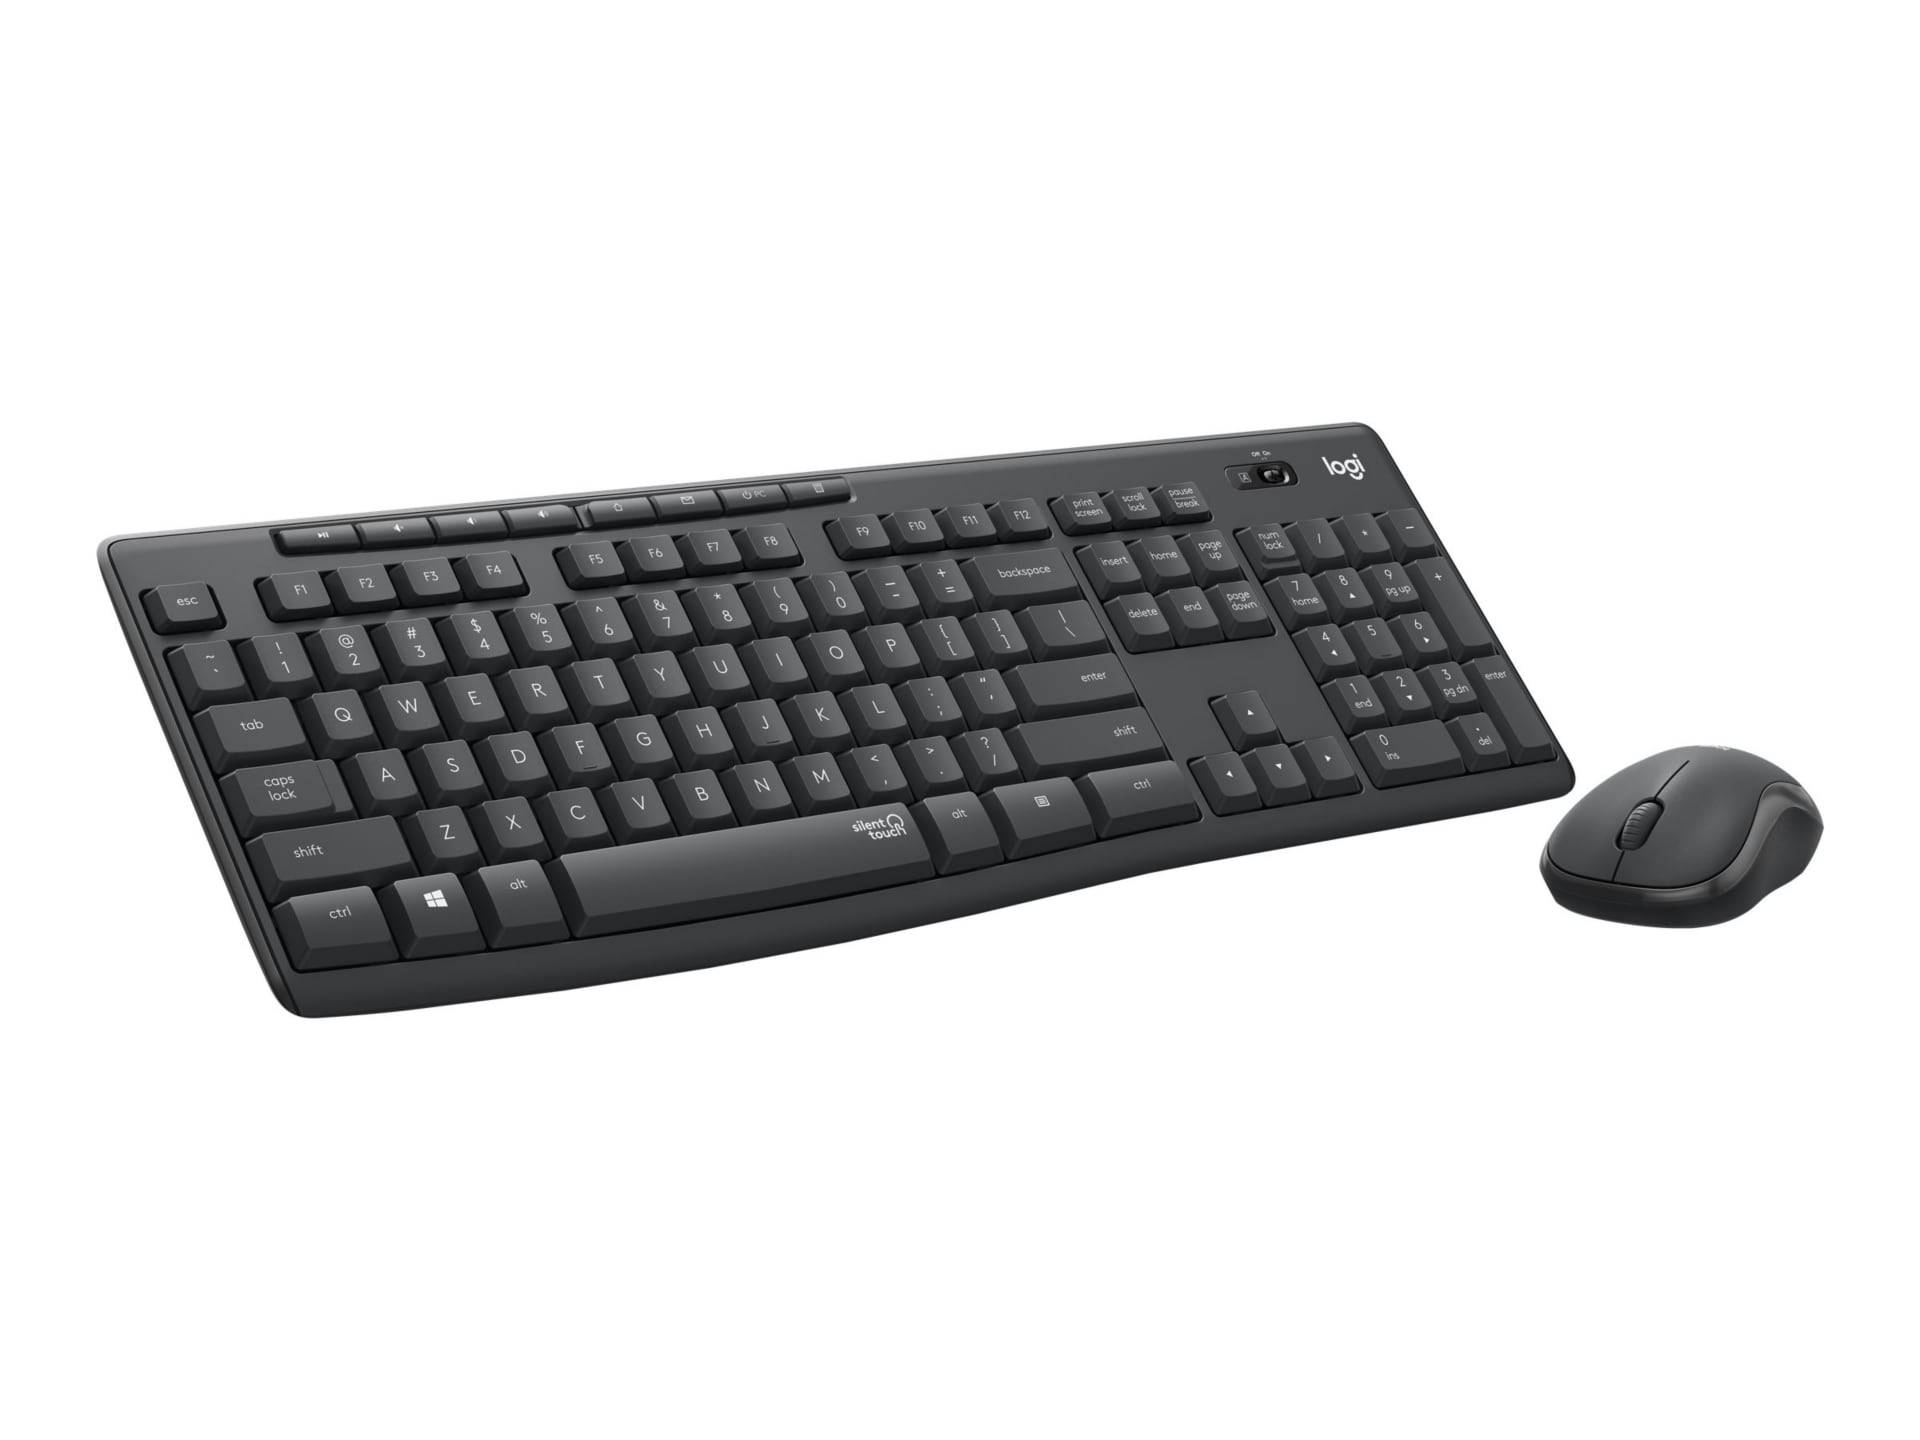 Logitech Easy Switch: Switching mice and keyboards between